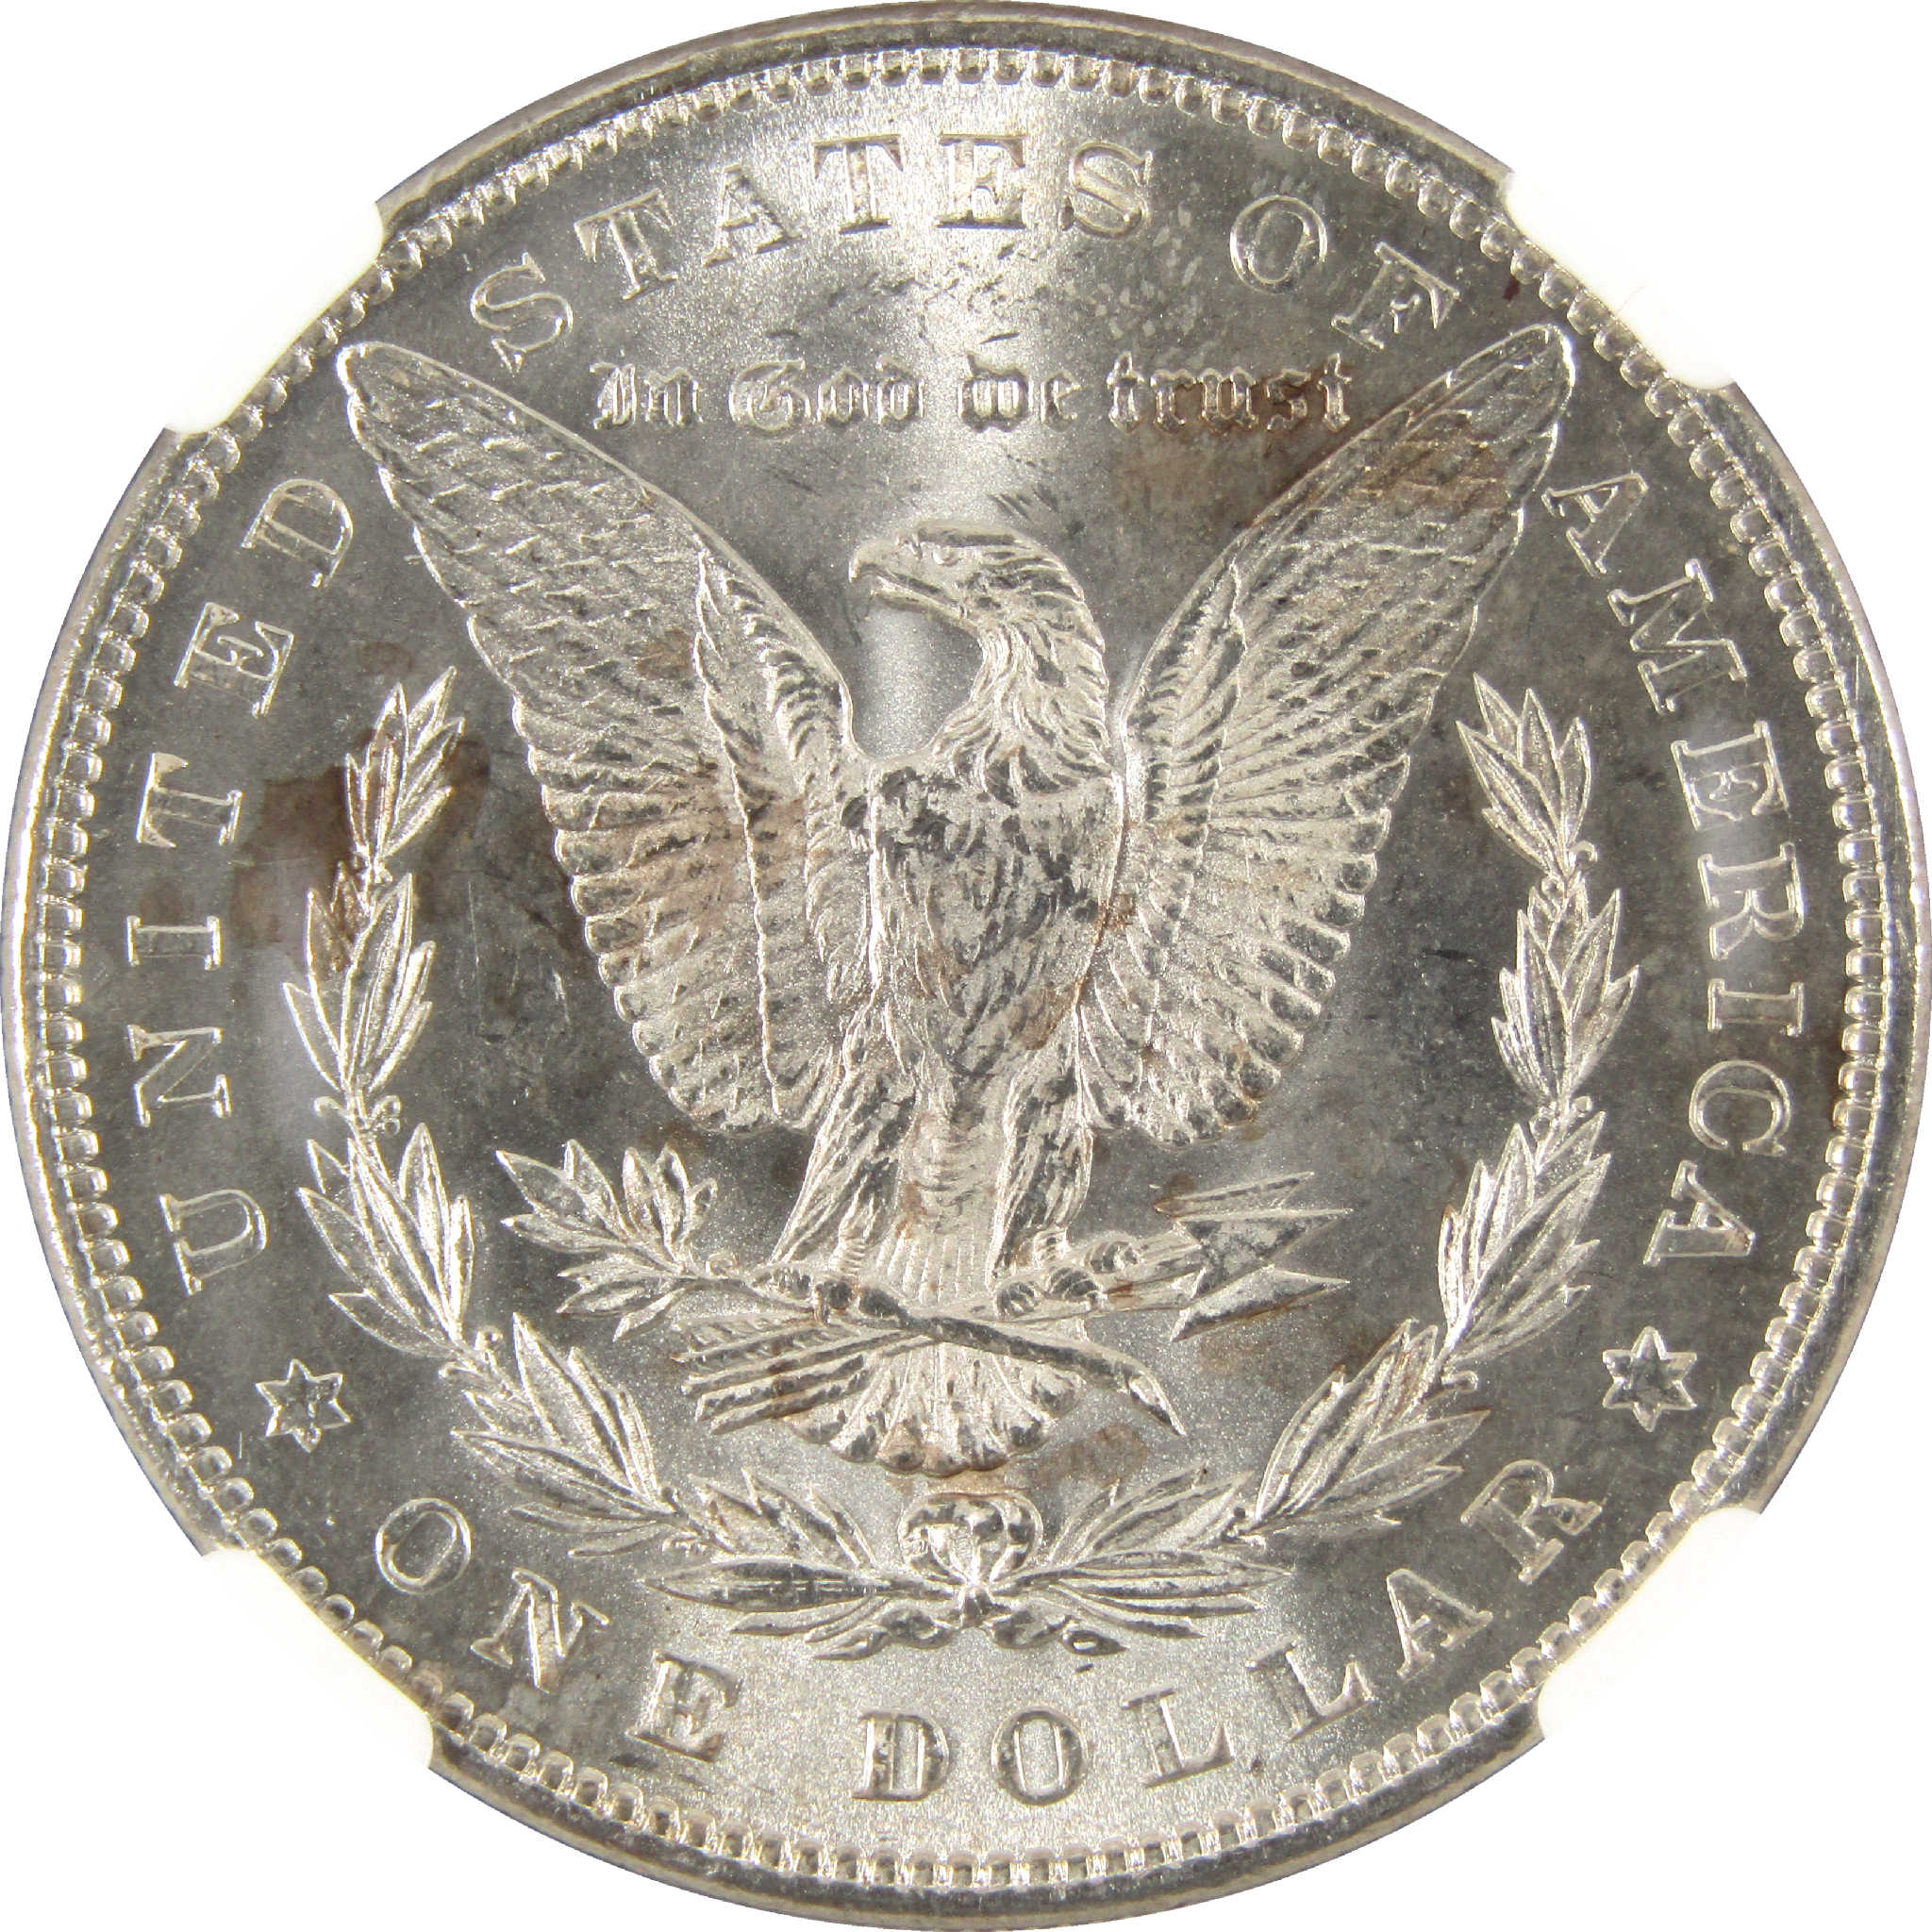 1883 Morgan Dollar MS 65 NGC Silver $1 Uncirculated Coin SKU:CPC6279 - Morgan coin - Morgan silver dollar - Morgan silver dollar for sale - Profile Coins &amp; Collectibles